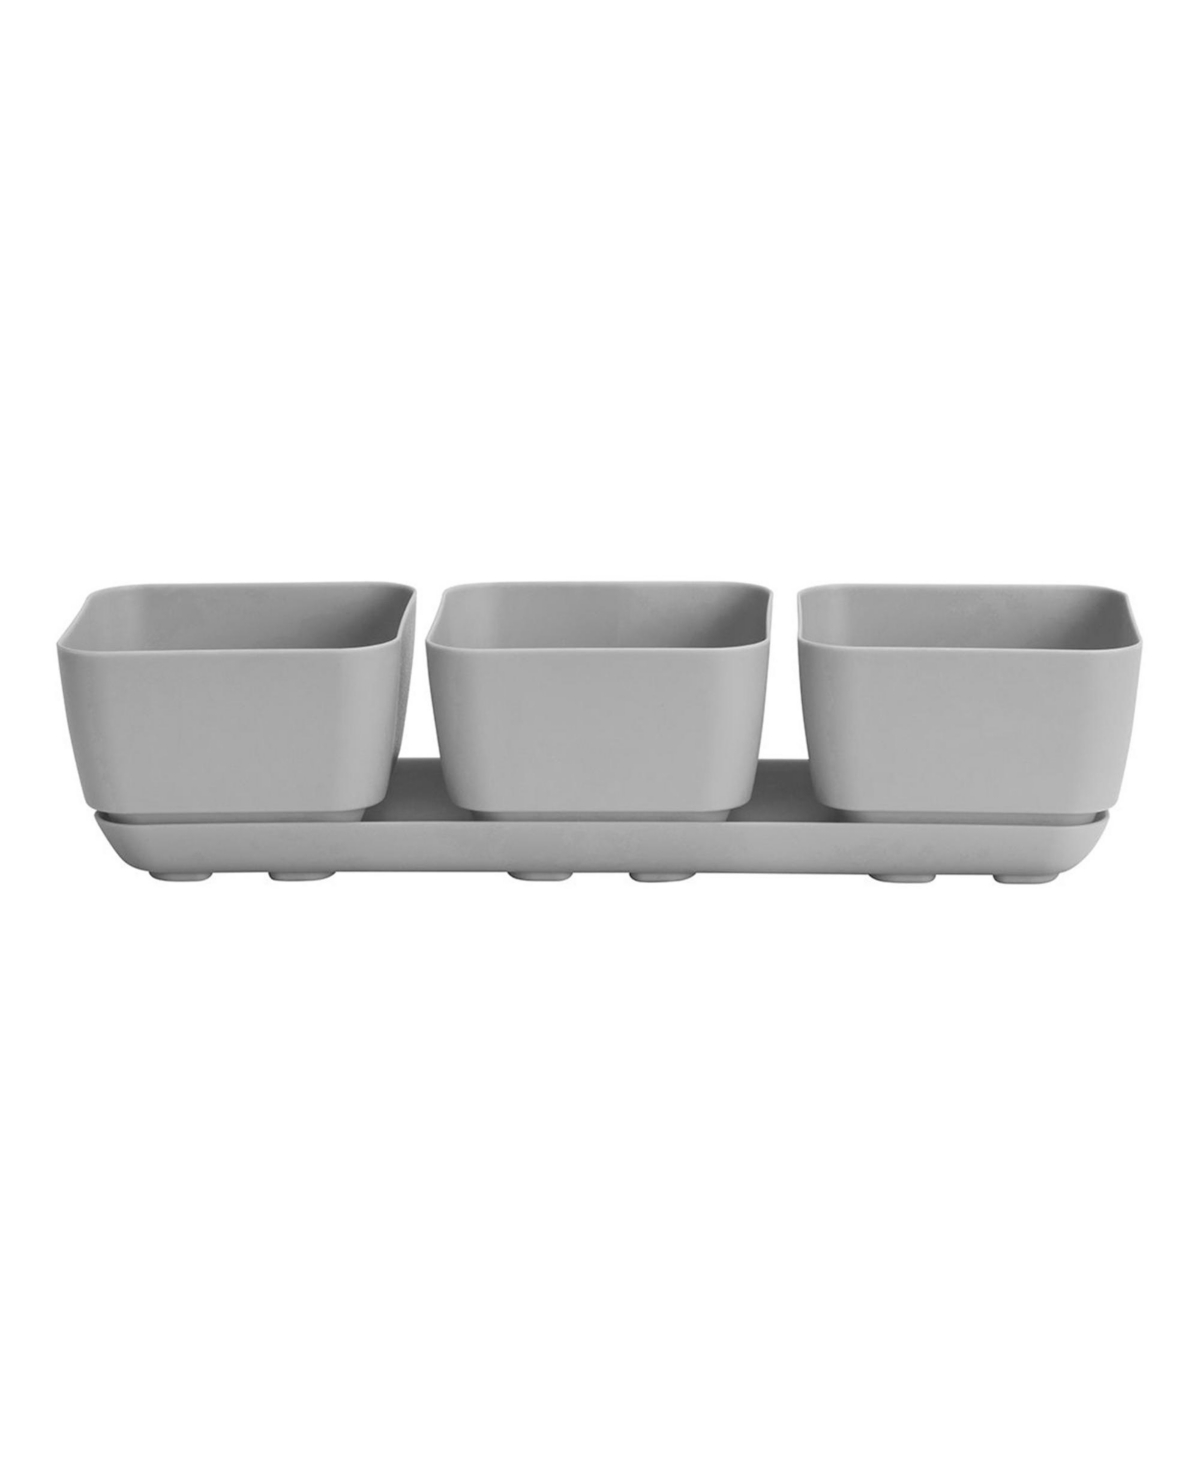 (10010) Herb Trio with Attached Tray, 12" x 14" - Grey - Grey